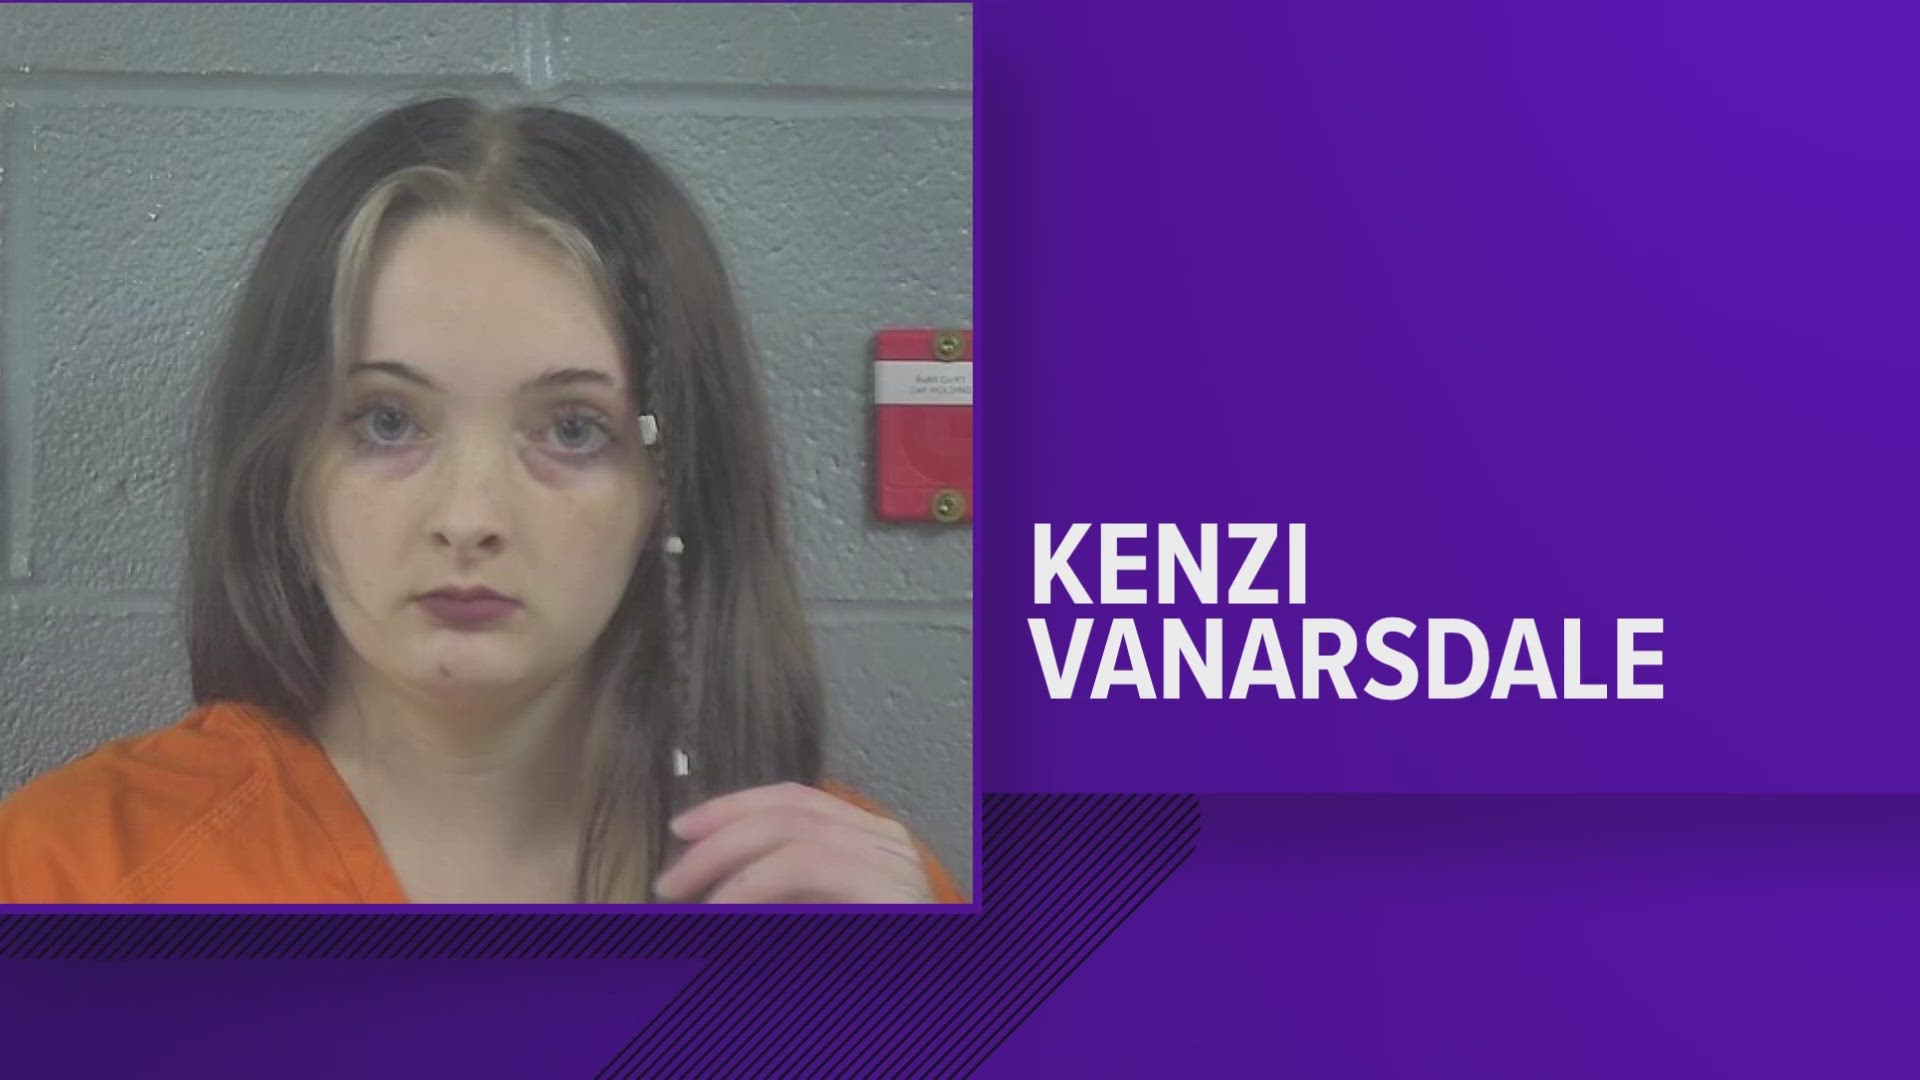 Kenzi Vanarsdale, 18, has been arrested after police tried to kill a Mt. Washington officer early Saturday.